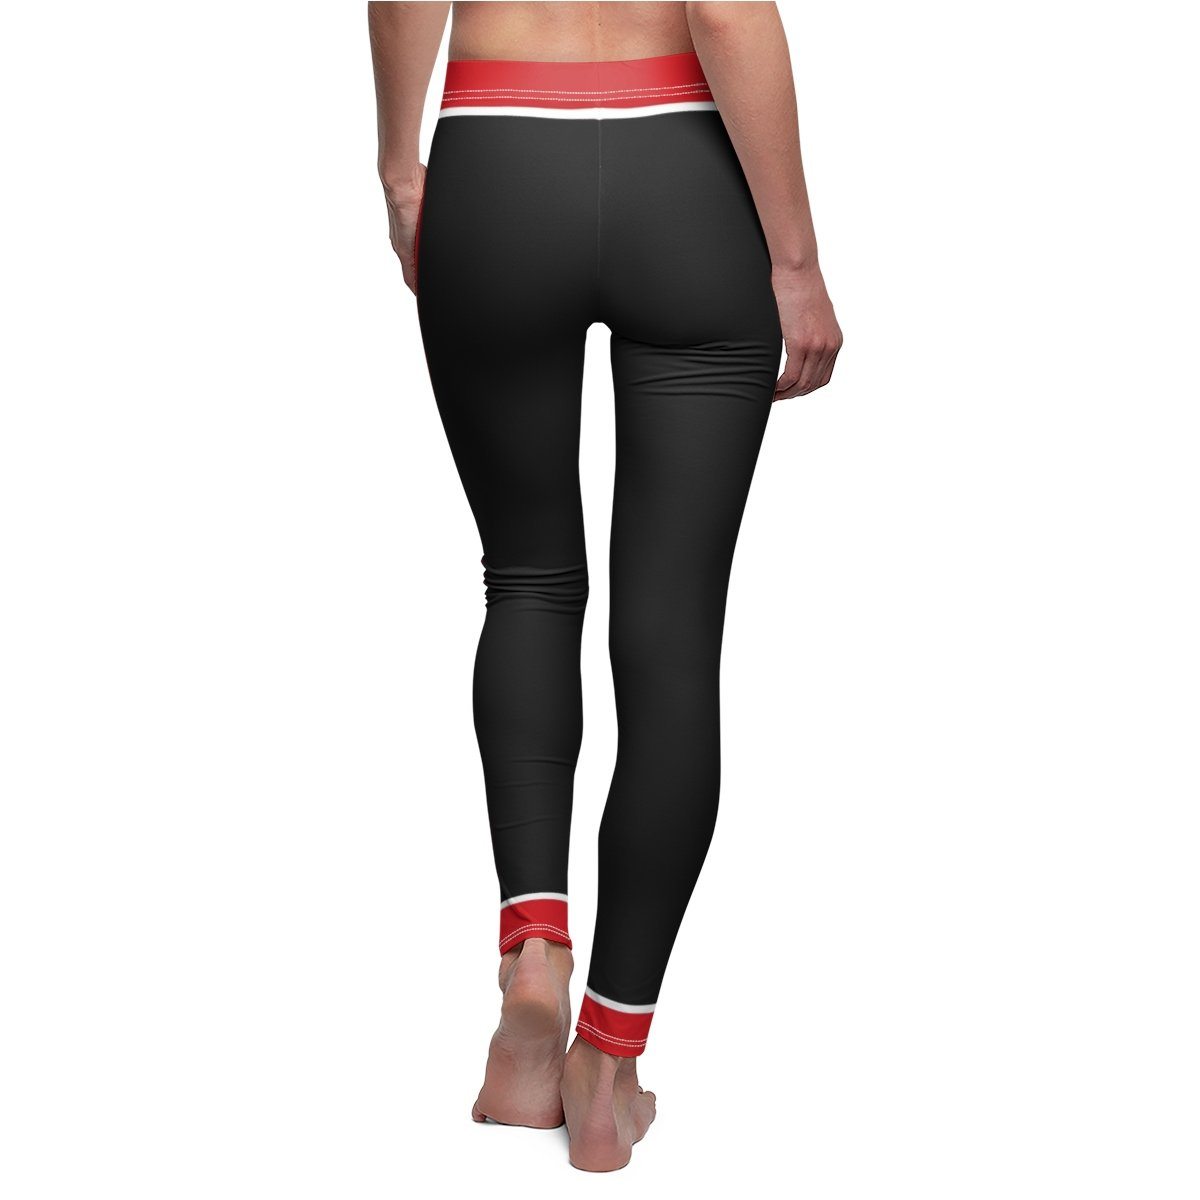 Spirit - V.1 - Extreme Sportswear Cut & Sew Leggings Template-Photoshop Template - Photo Solutions